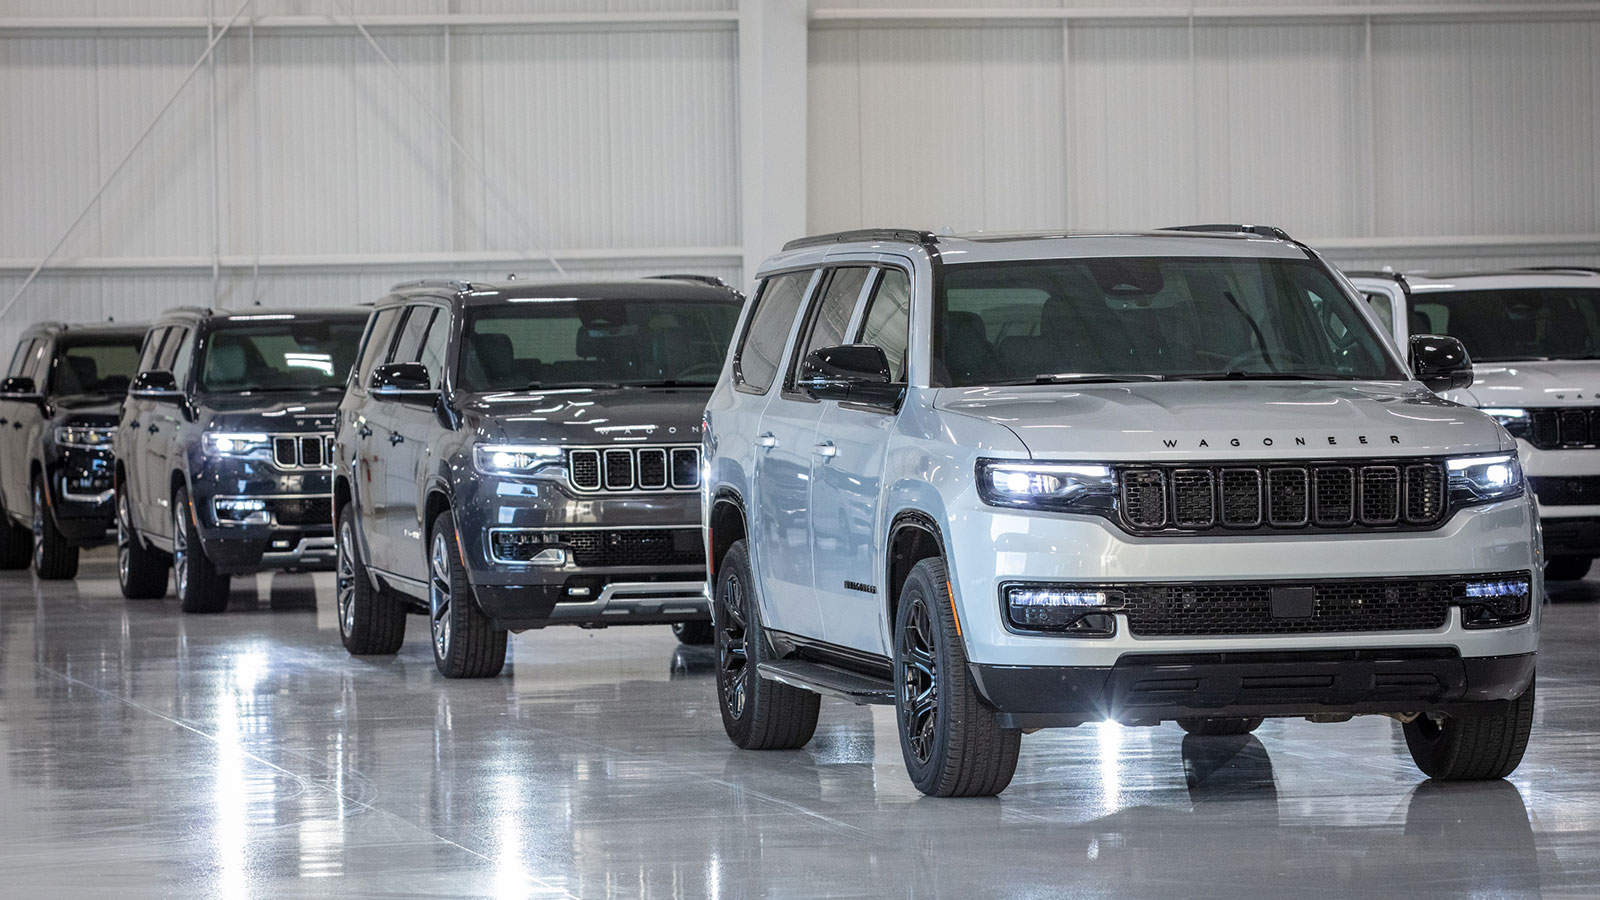 Multiple Jeep Wagoneer parked inside a warehouse, while interest rates affect EV budgets